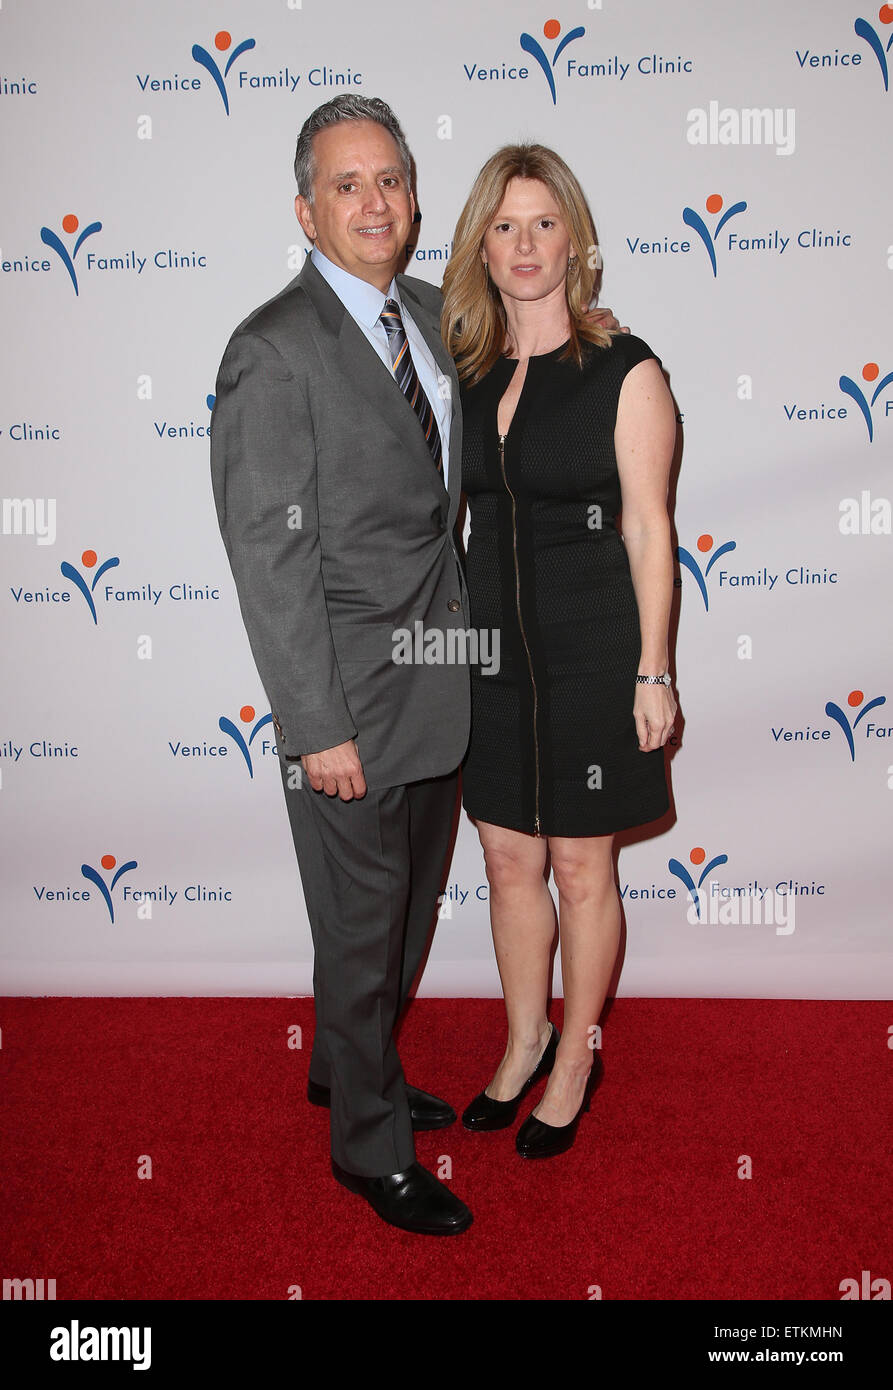 Venice Family Clinic's 33rd Annual Silver Circle Gala at the Beverly Wilshire Four Seasons Hotel  Featuring: Julie Liker, Guest Where: Los Angeles, California, United States When: 09 Mar 2015 Credit: FayesVision/WENN.com Stock Photo